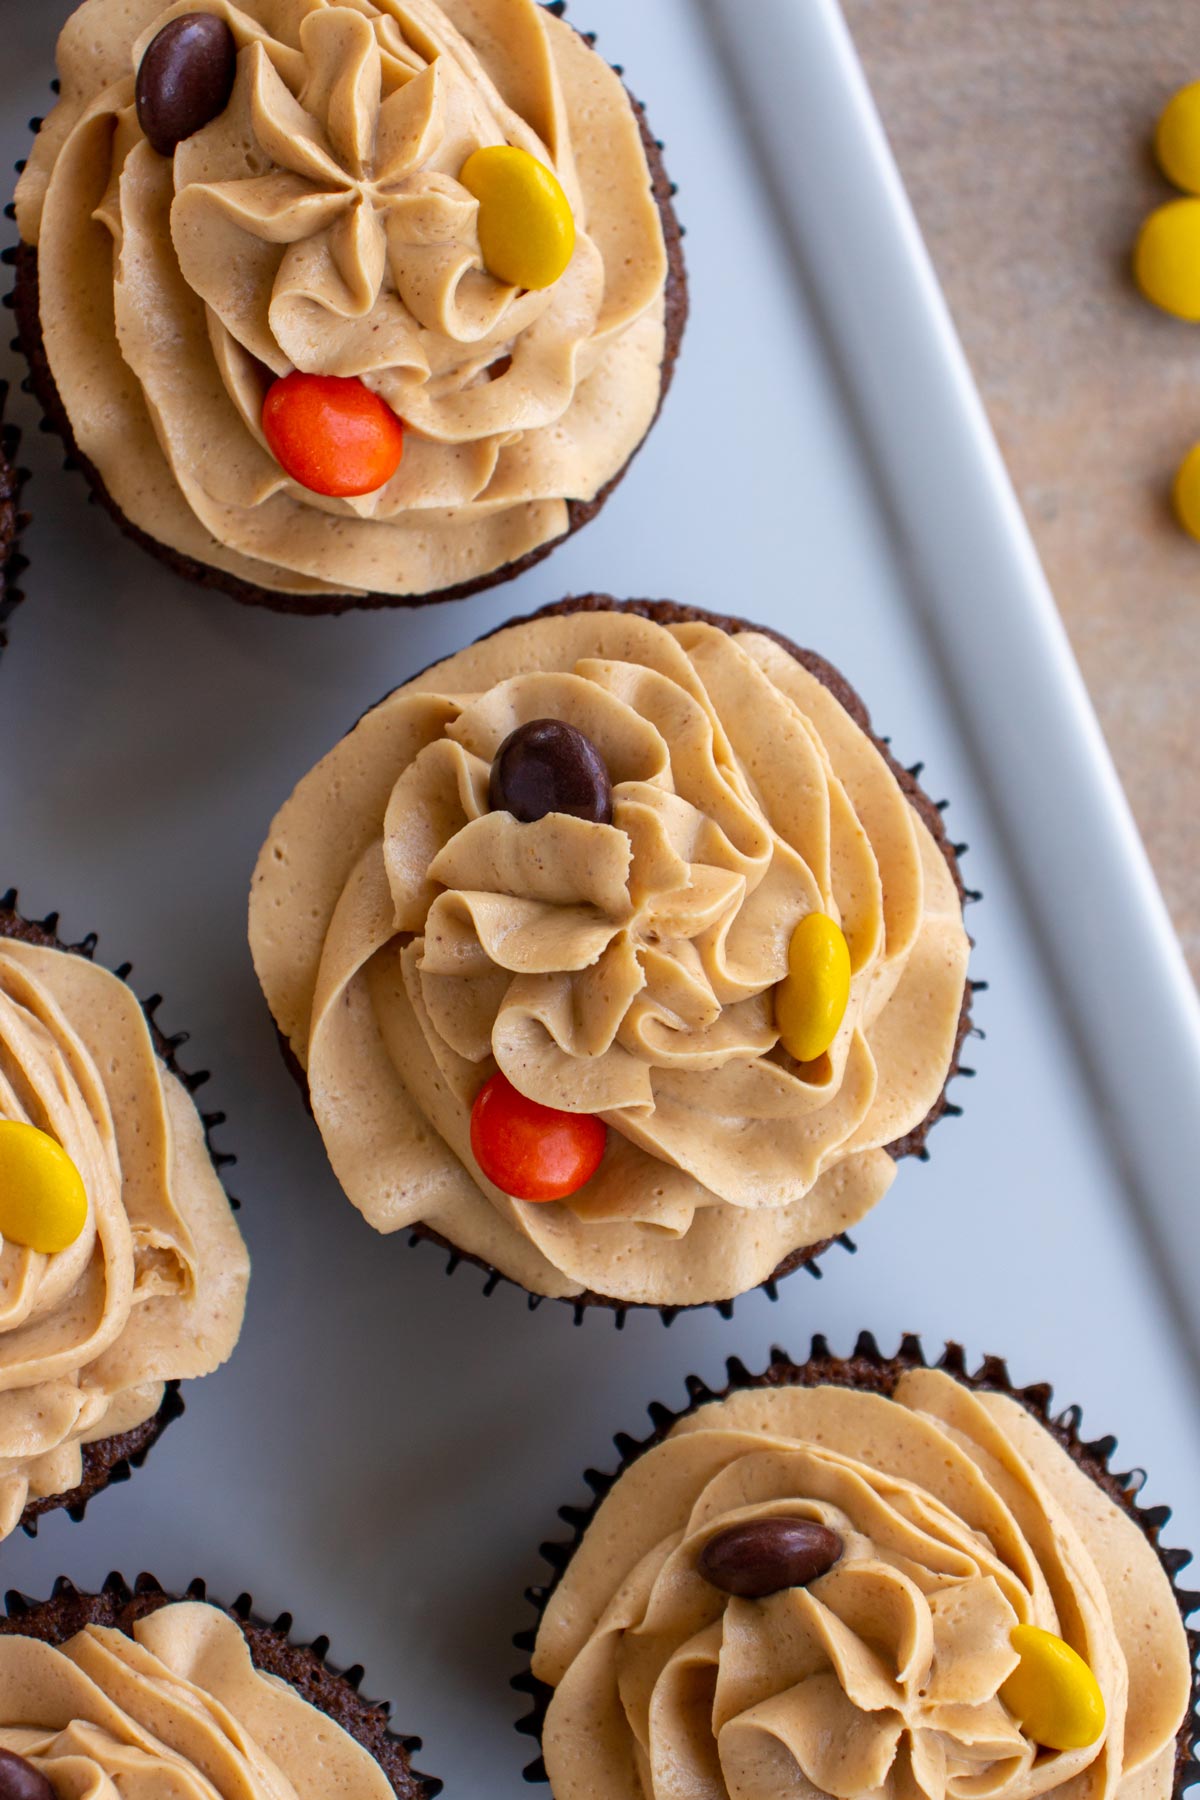 Peanut butter frosting piped on top of cupcakes with Reese's Pieces candies on top.